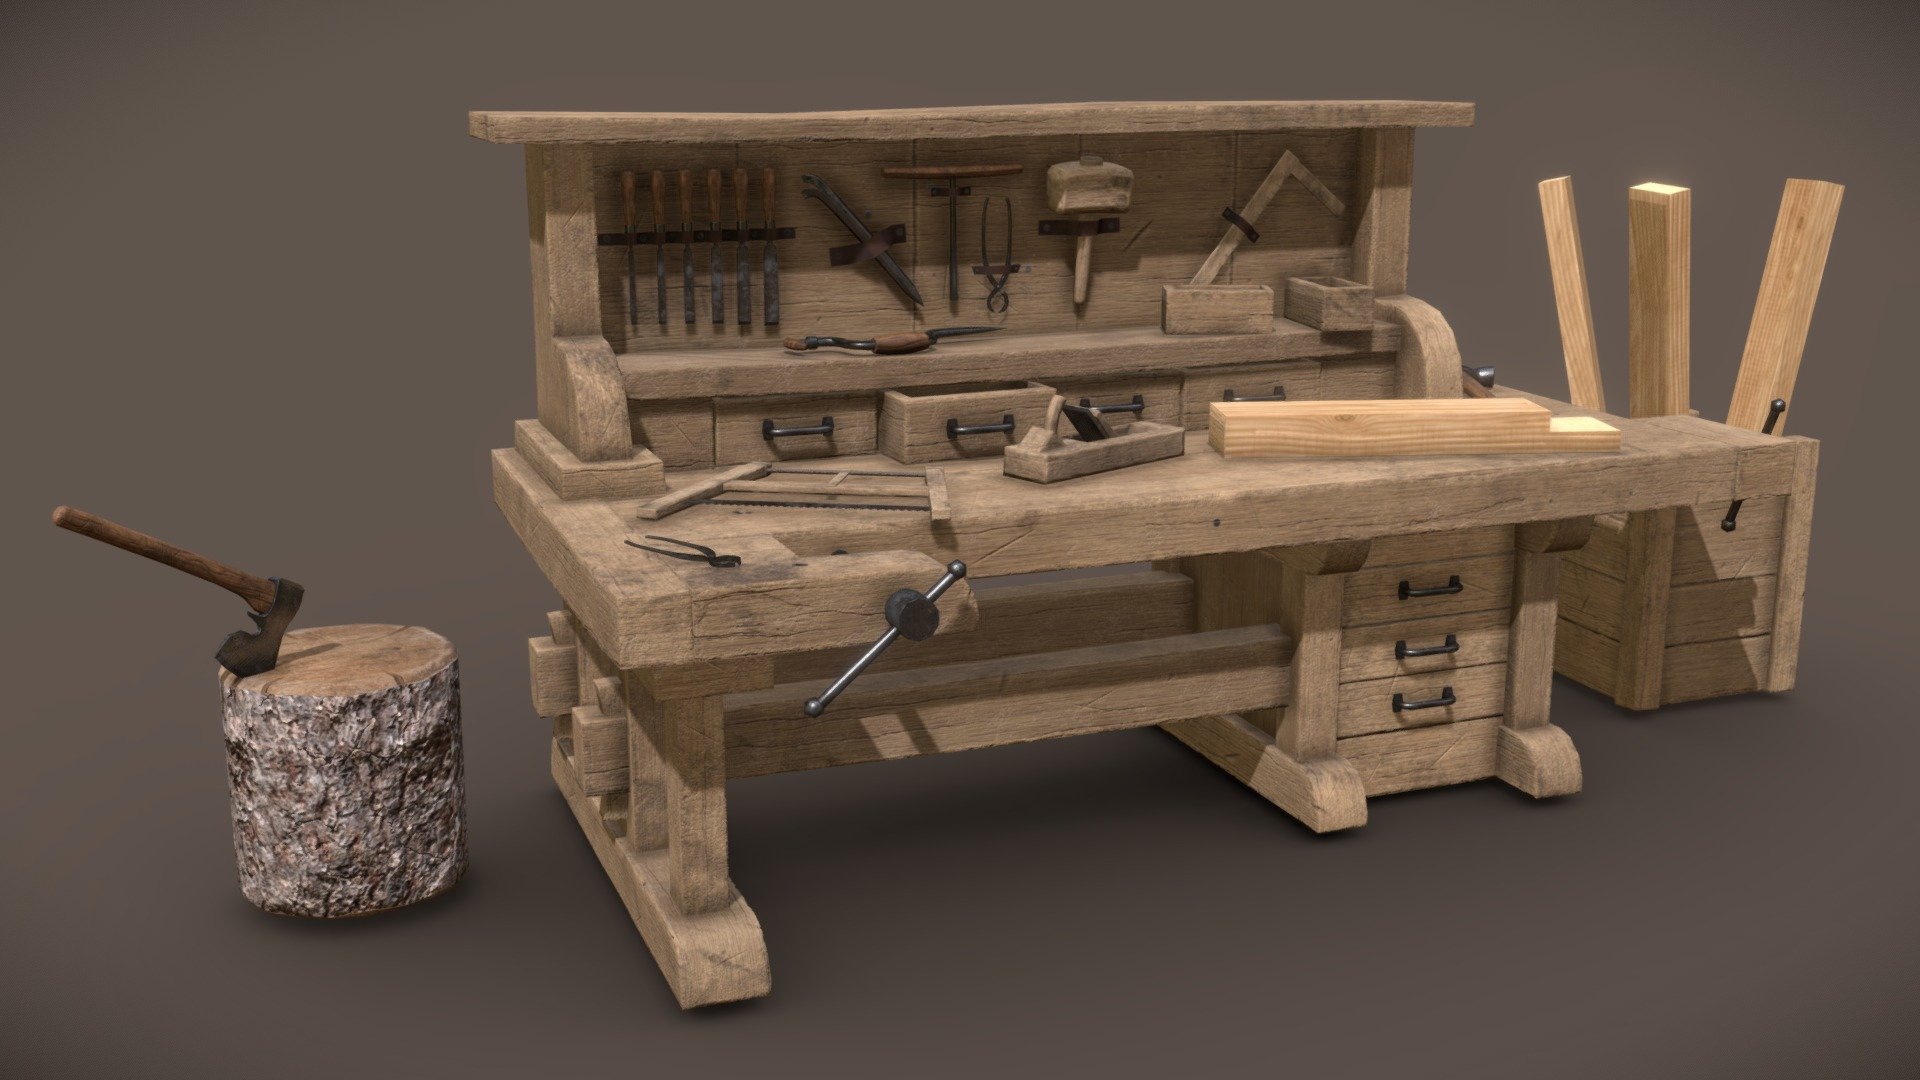 Carpentry Workstation
Model created with the intention of being used in medieval and fantasy-style games. Of course, I tried to make it relatively universal and useful for everyone :) Happy crafting!




Optimized 3D models ready for use in video games and other projects.

carpentry station + 16 tools.

separated materials (3) for tools, chisels and carpentry station.

two texture variants for the carpentry table - 2048x2048 and 4069x4069

5.3k verts =&gt; 9.4k tris

prepared and arranged files

For specific questions, feel free to comment or contact me via email, Facebook, or Instagram, which are available on my profile😀

For more 3D models check my profile! 

  Don't forget to like and follow :) - Carpentry Table - Buy Royalty Free 3D model by Mikołaj Michalak (@M_Michalak) 3d model